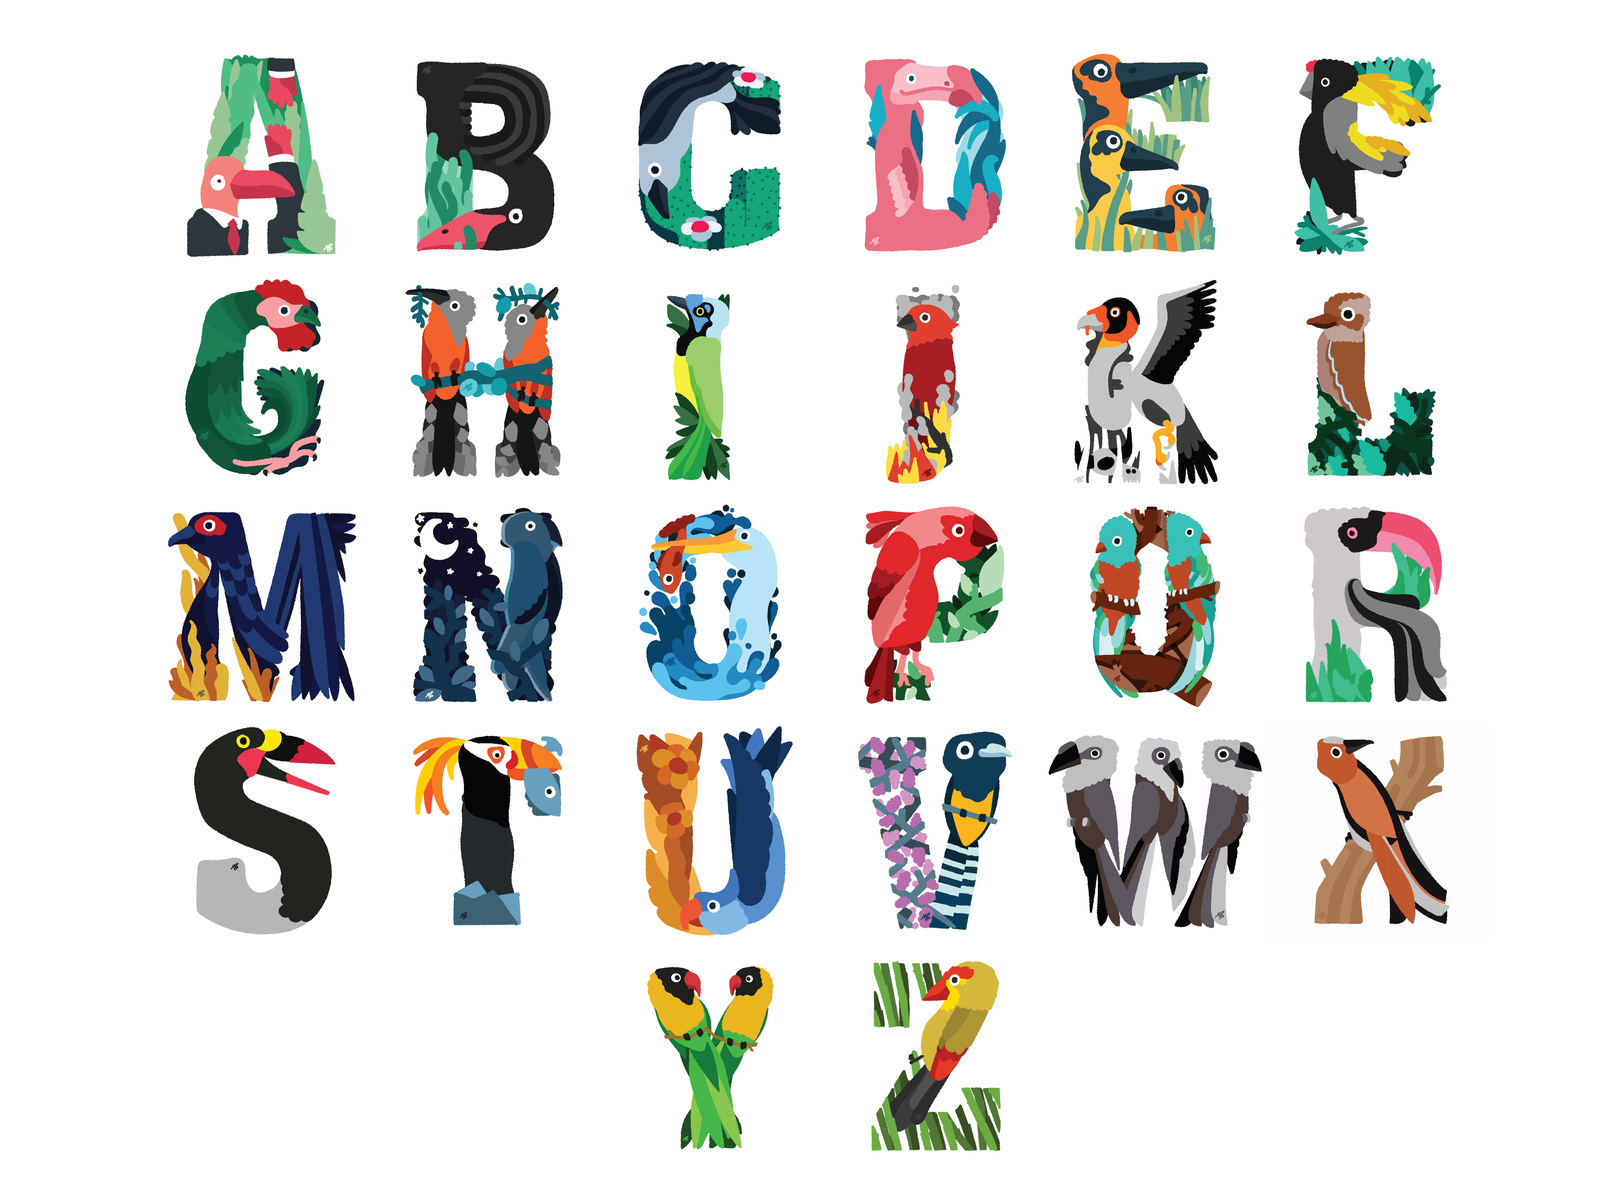 Illustrated Alphabet by Tim Biddle on Dribbble